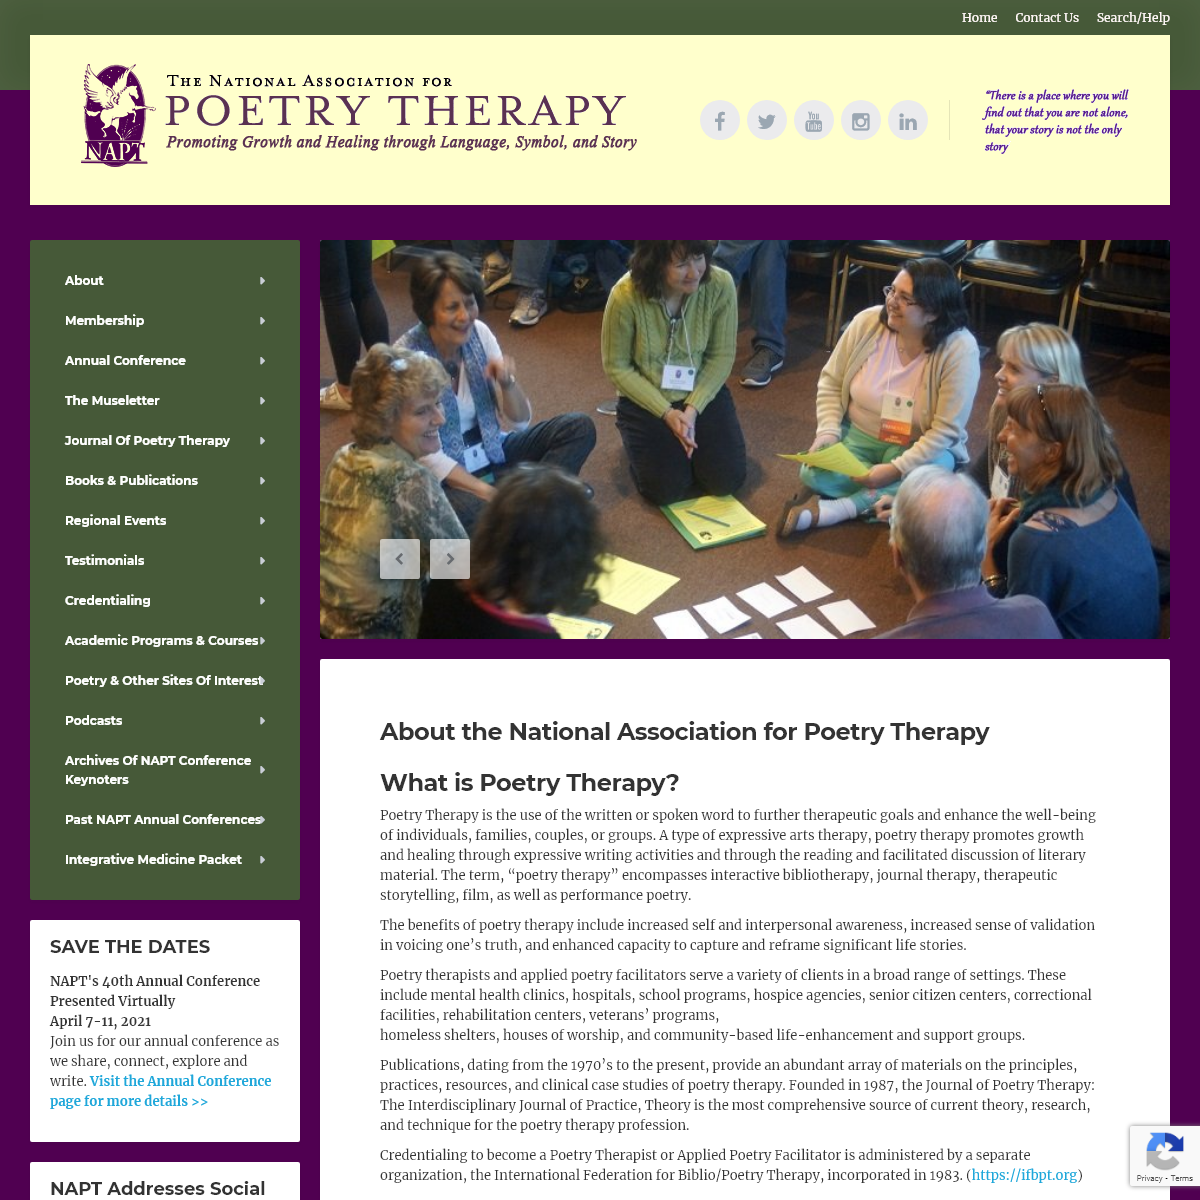 A complete backup of poetrytherapy.org